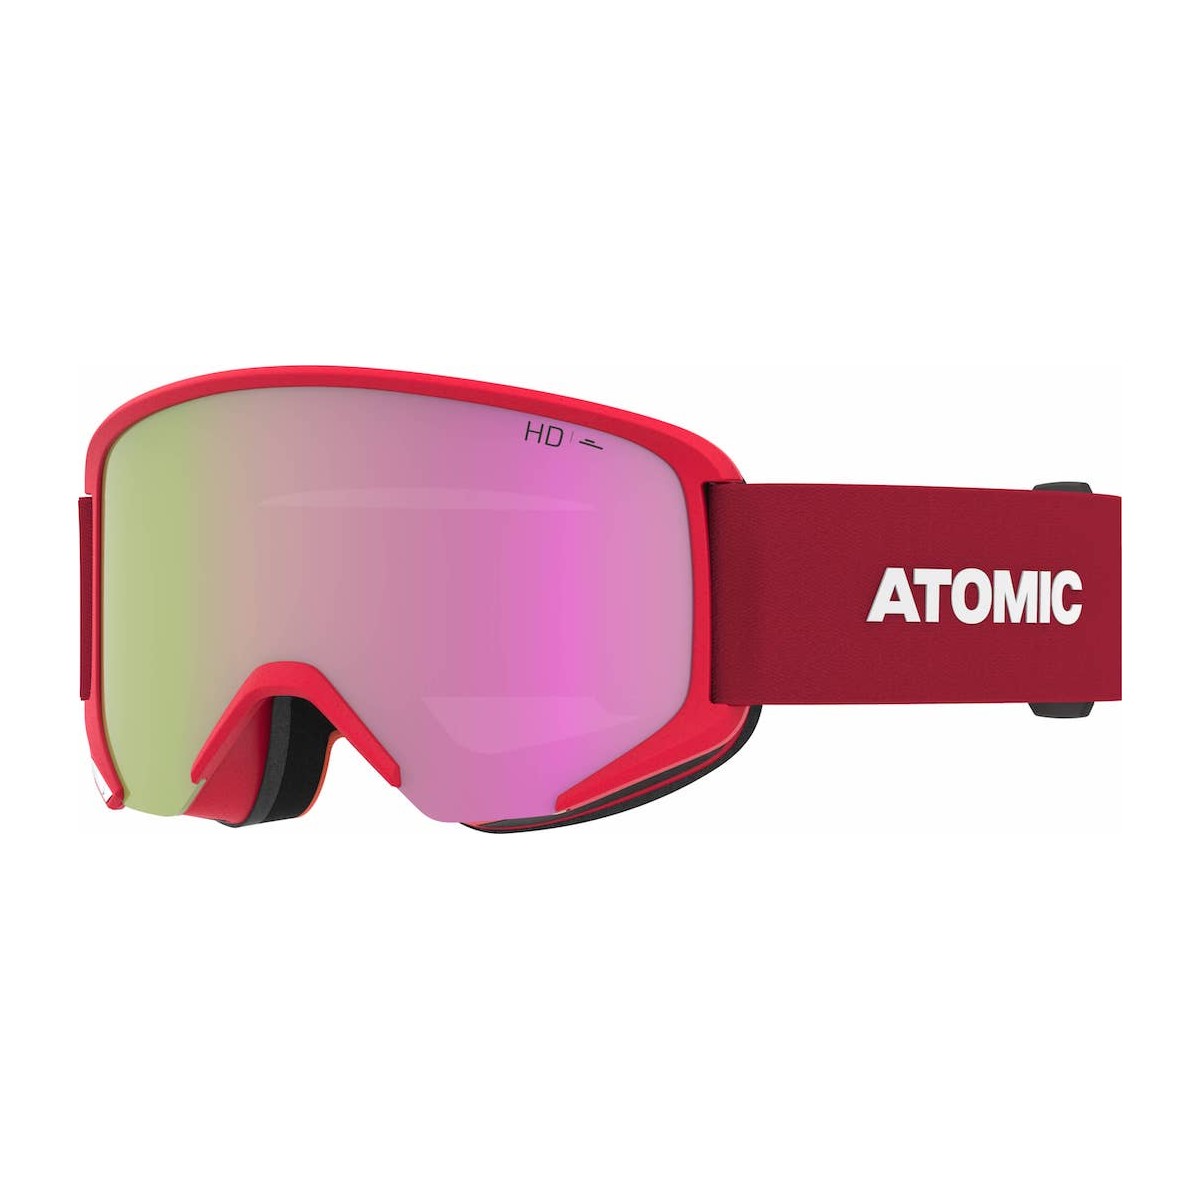 ATOMIC SAVOR HD RS W/PINK COPPER HD C2-3 W/XLENS C0-2 goggles - red